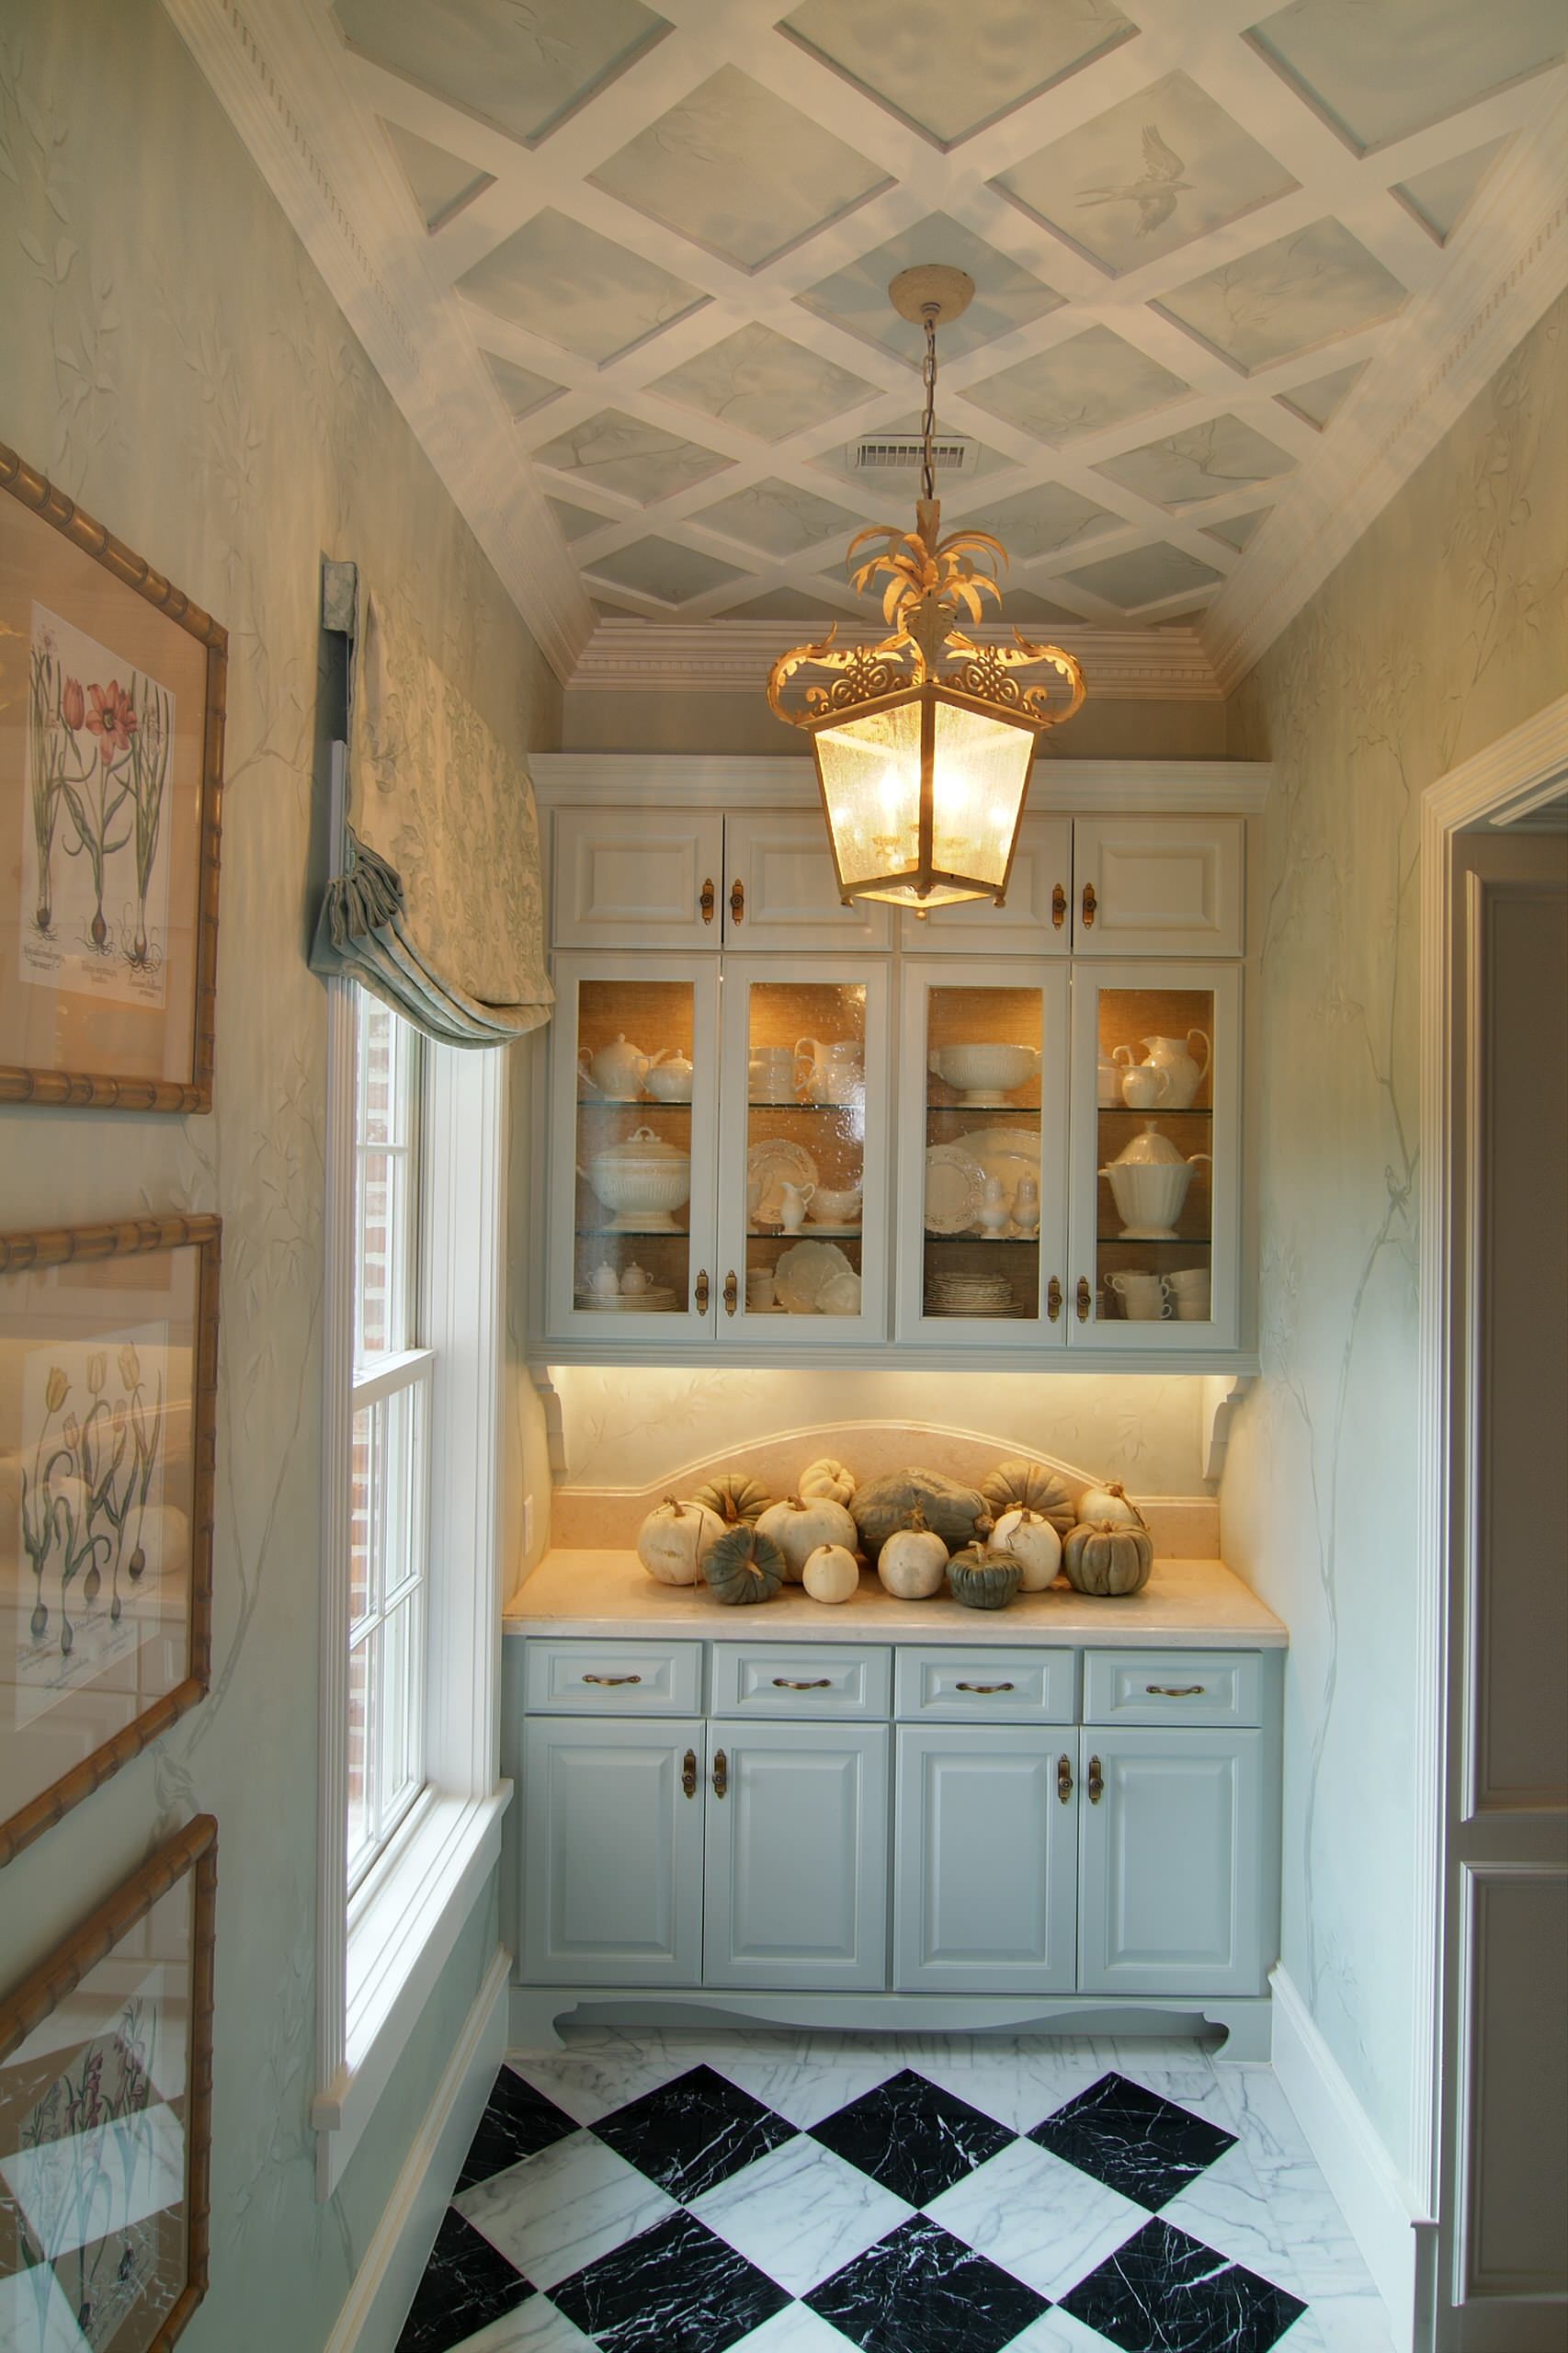 Floor To Ceiling Pull Out Pantry Cabinet Design Ideas